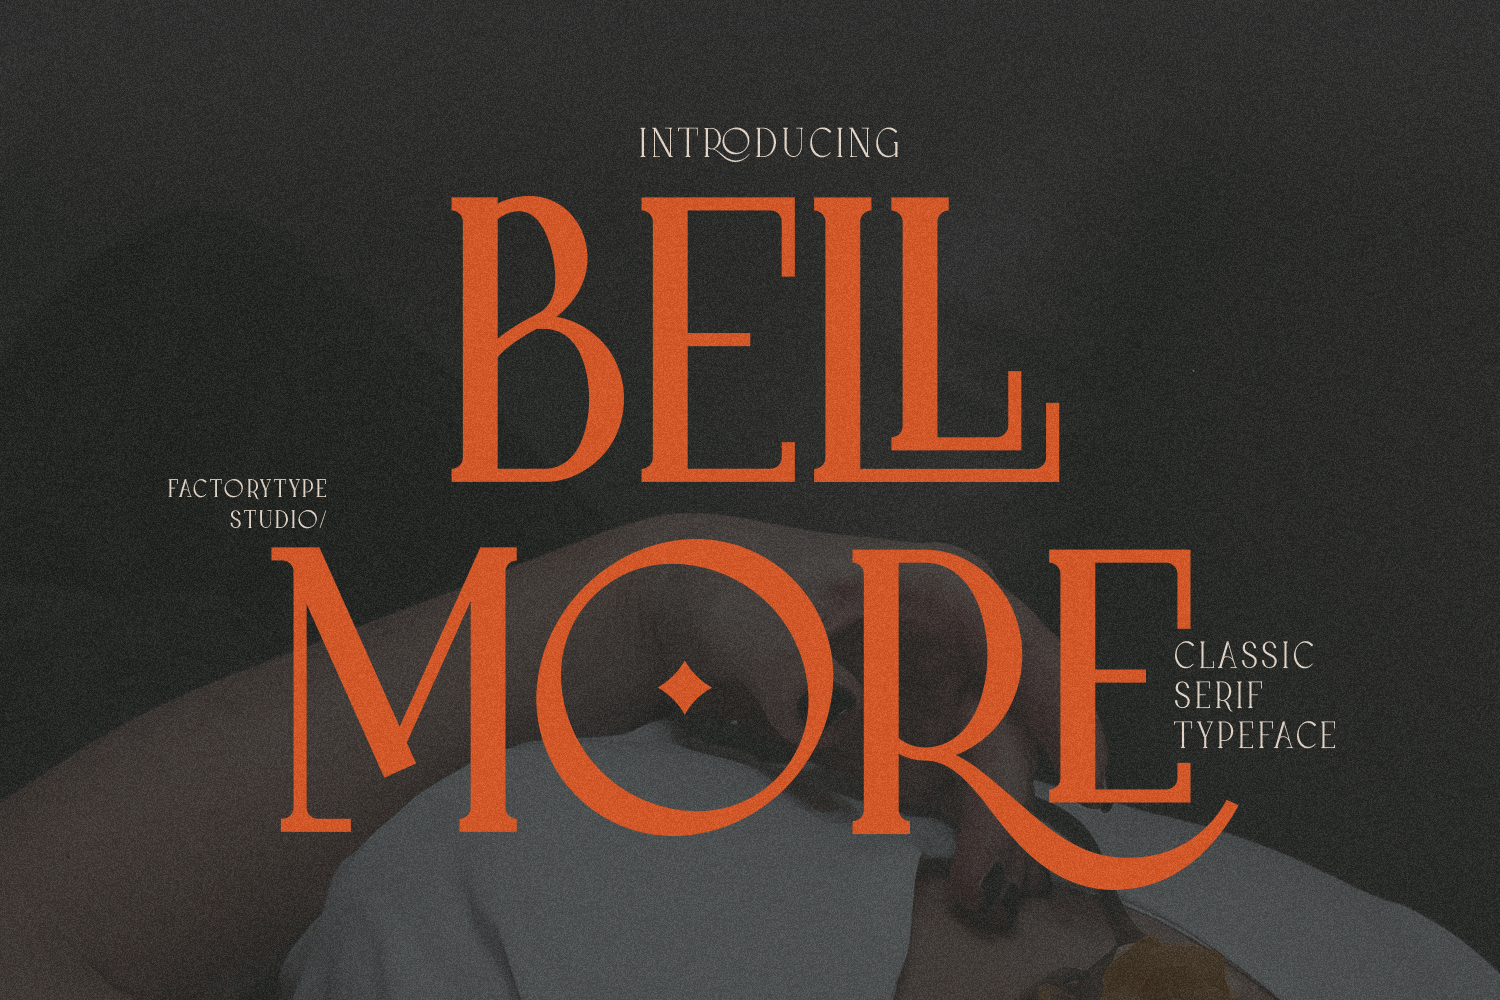 Bell More Free Font